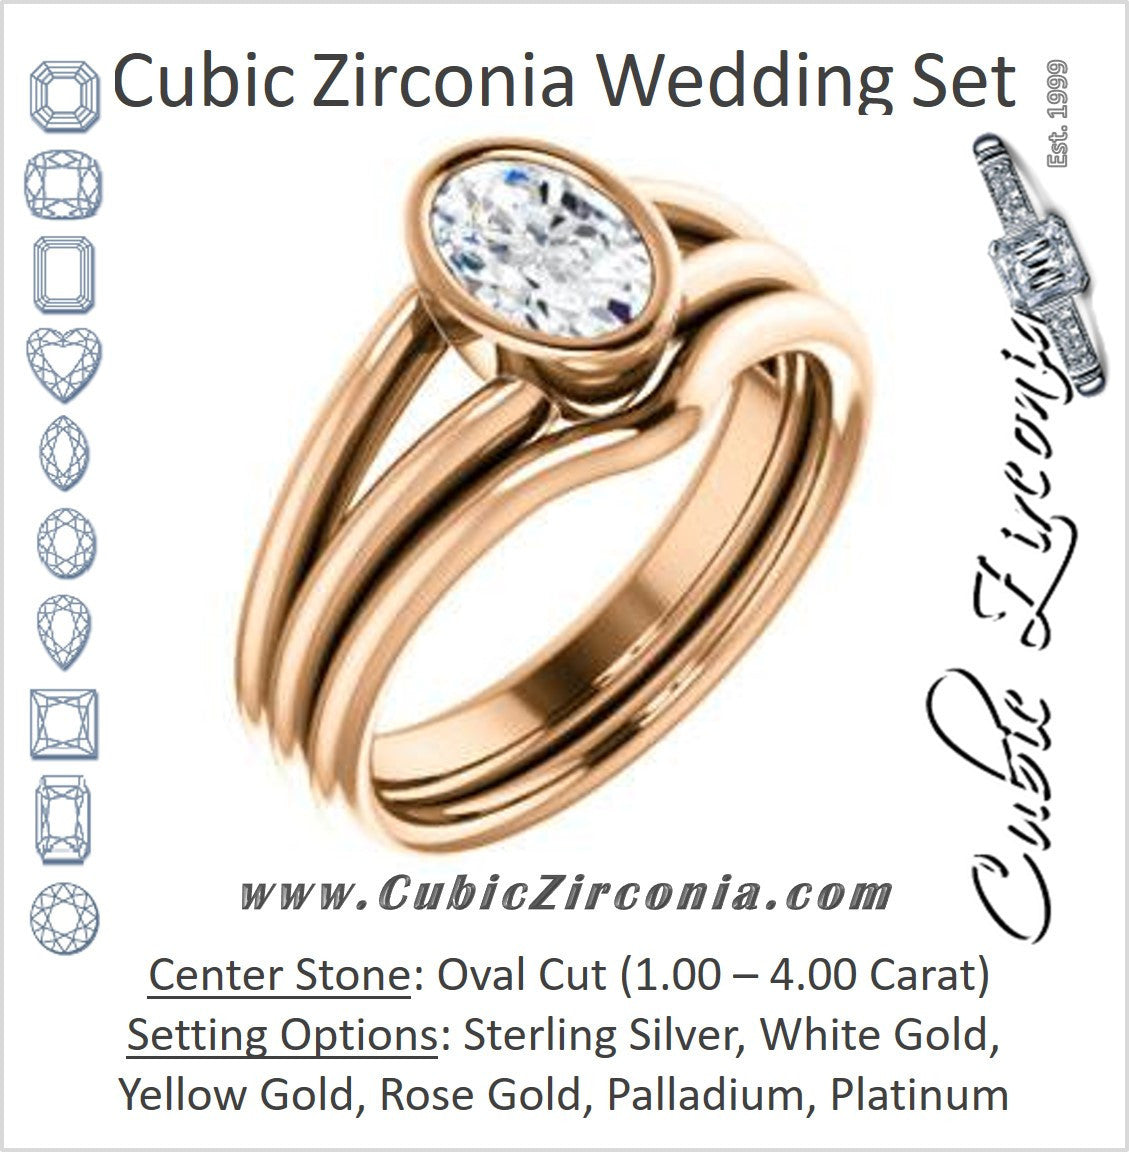 CZ Wedding Set, featuring The Shae engagement ring (Customizable Oval Cut Split-Band Solitaire)